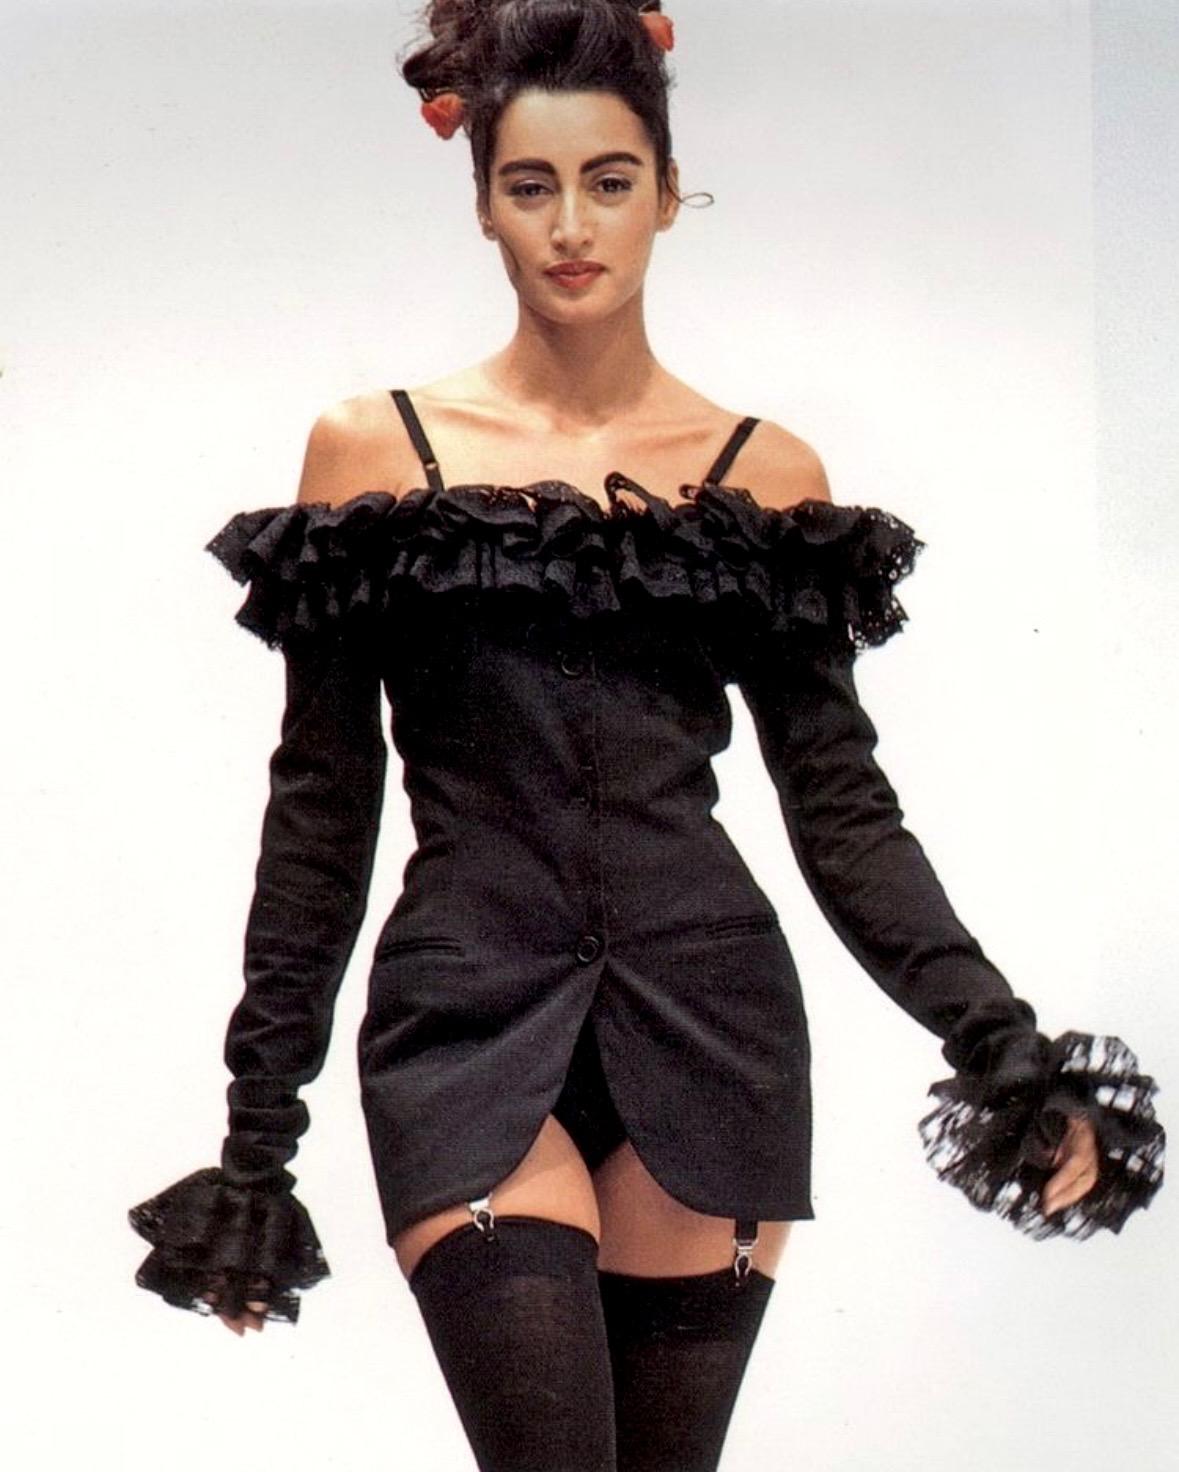 Presenting a fabulous black ruffle Dolce and Gabbana crop stop. From the Spring/Summer 1992 collection, this top features a tie between the breasts and lightly flared long sleeves. The top hangs from small straps that allow the top to hang off the